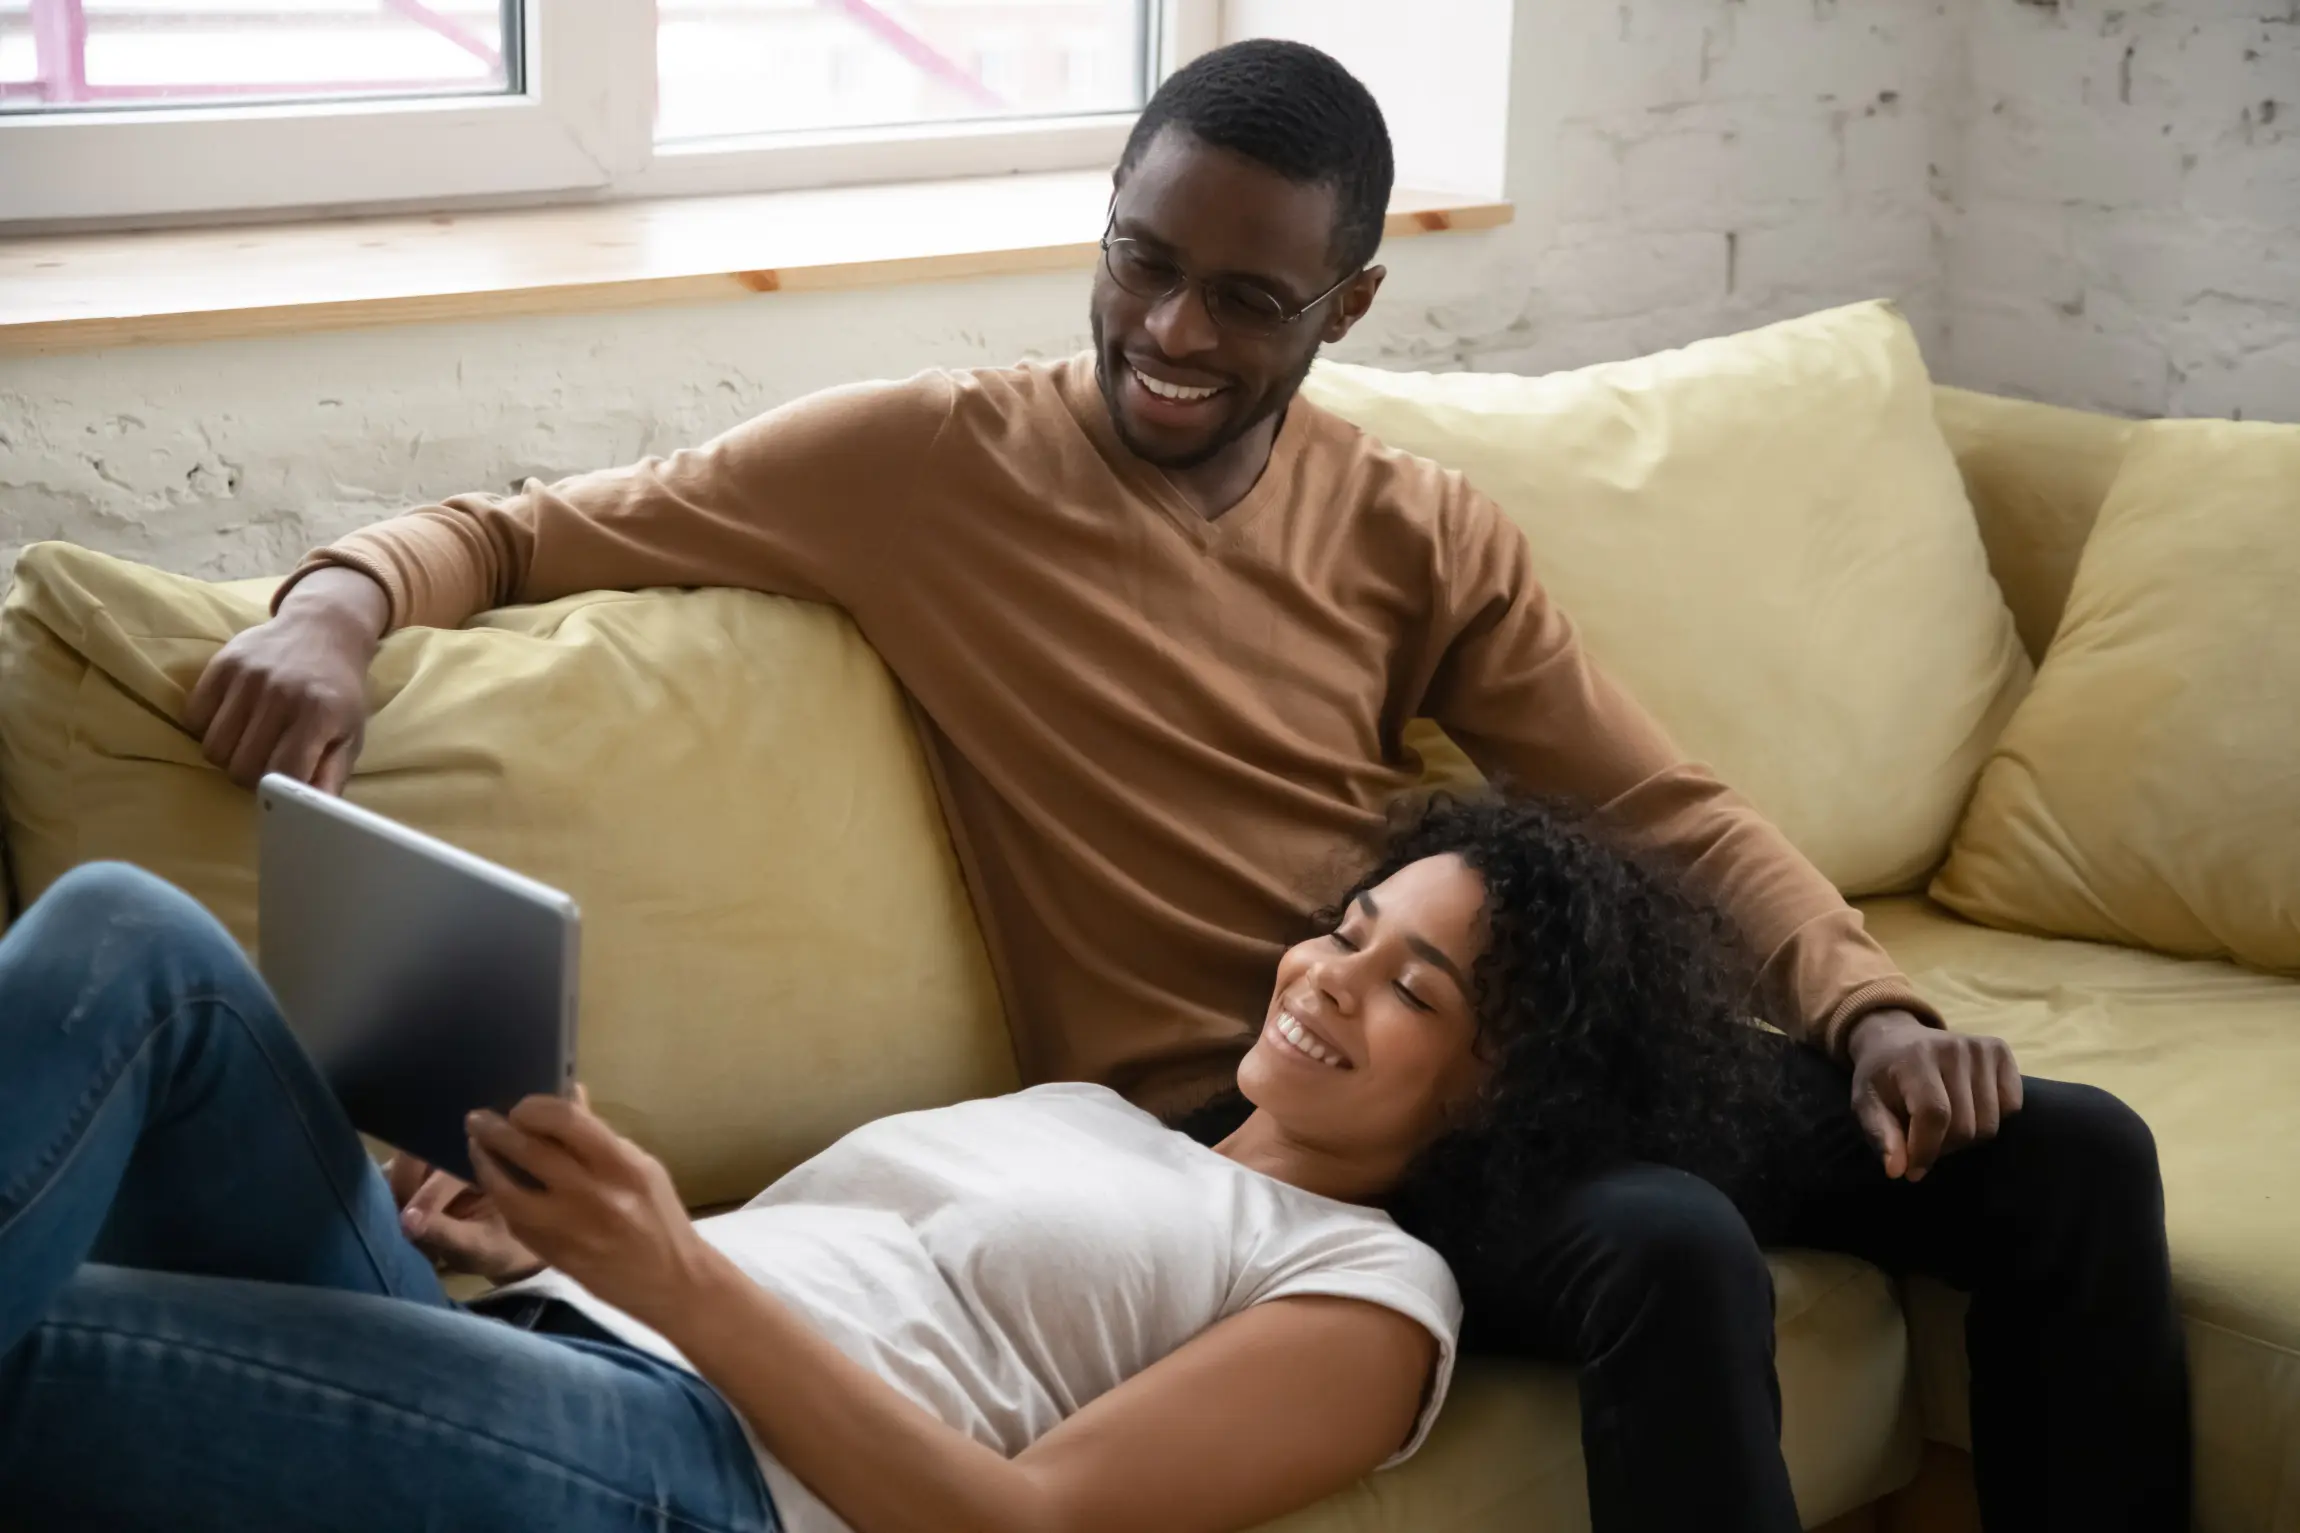 A young couple sits together on the sofa and looks at a tablet.